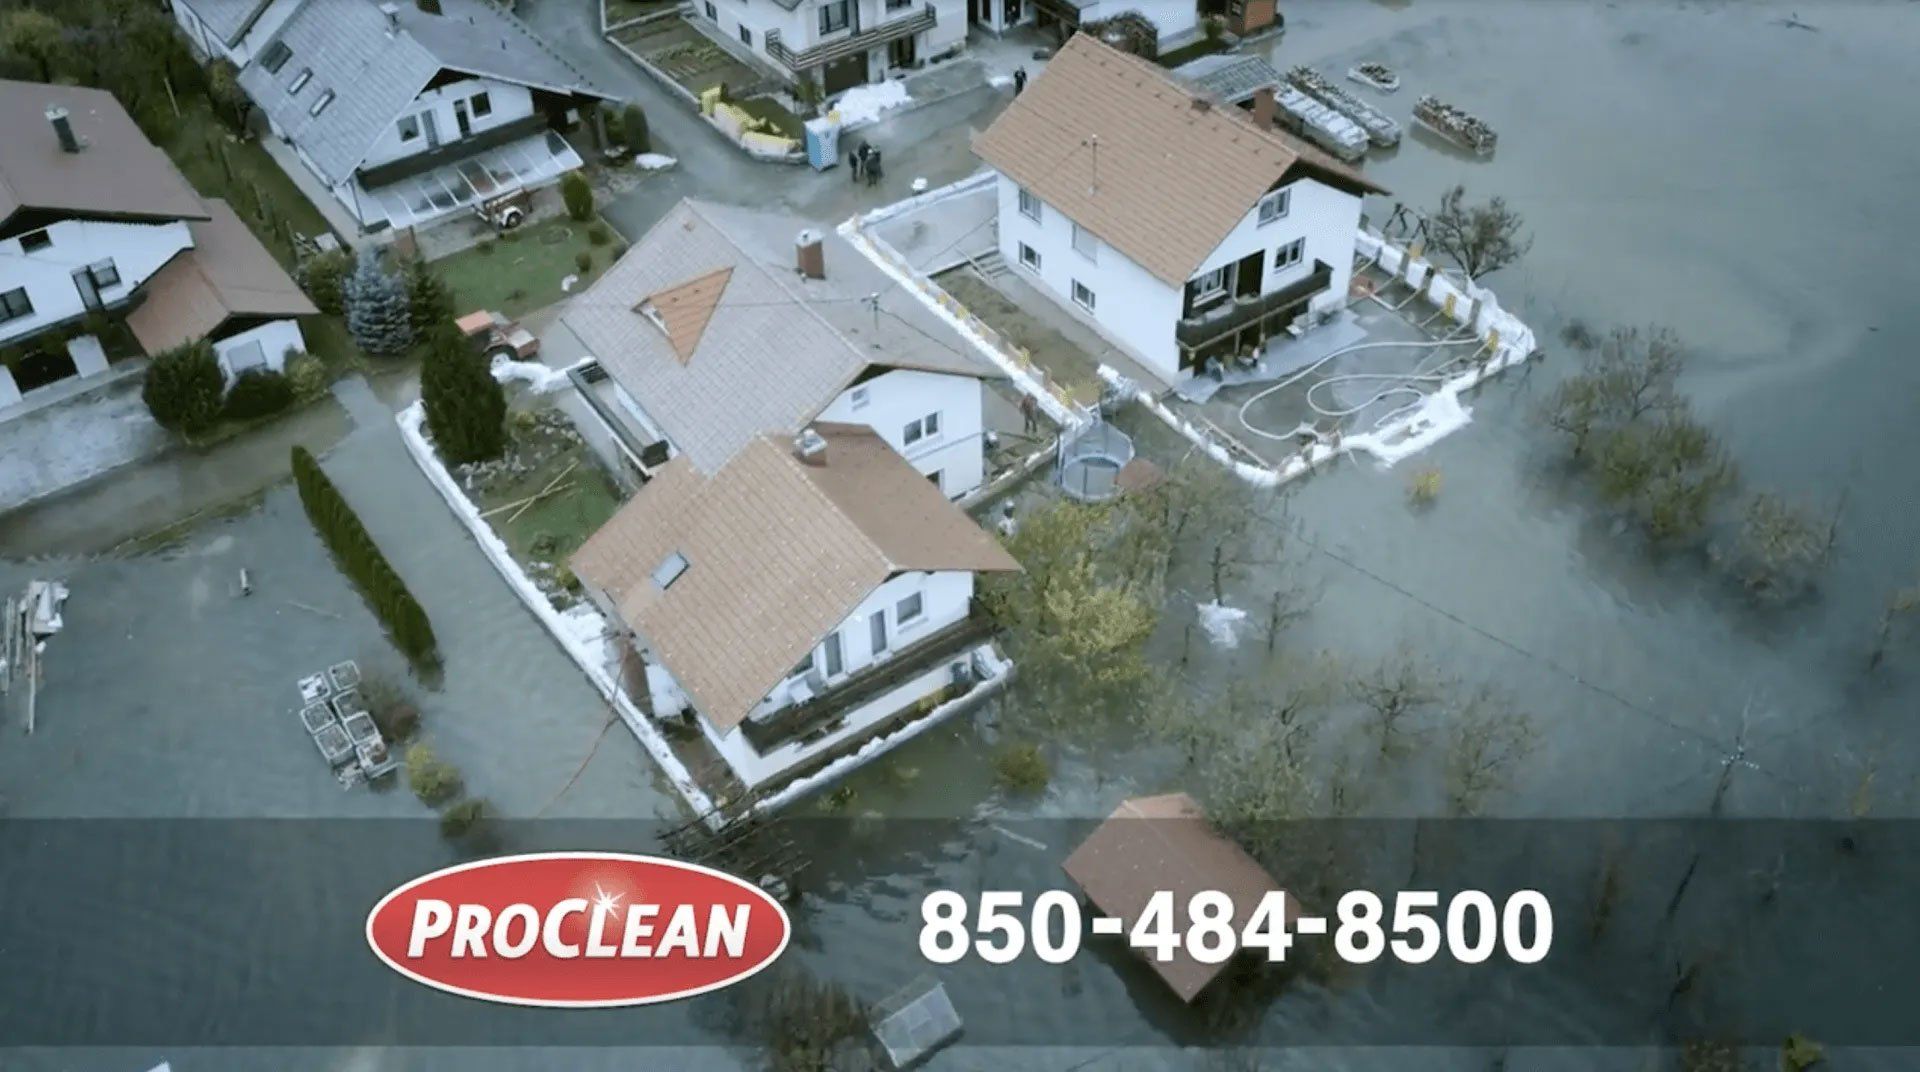 If There's Any Water or Mold At All, Make Us Your First Call.